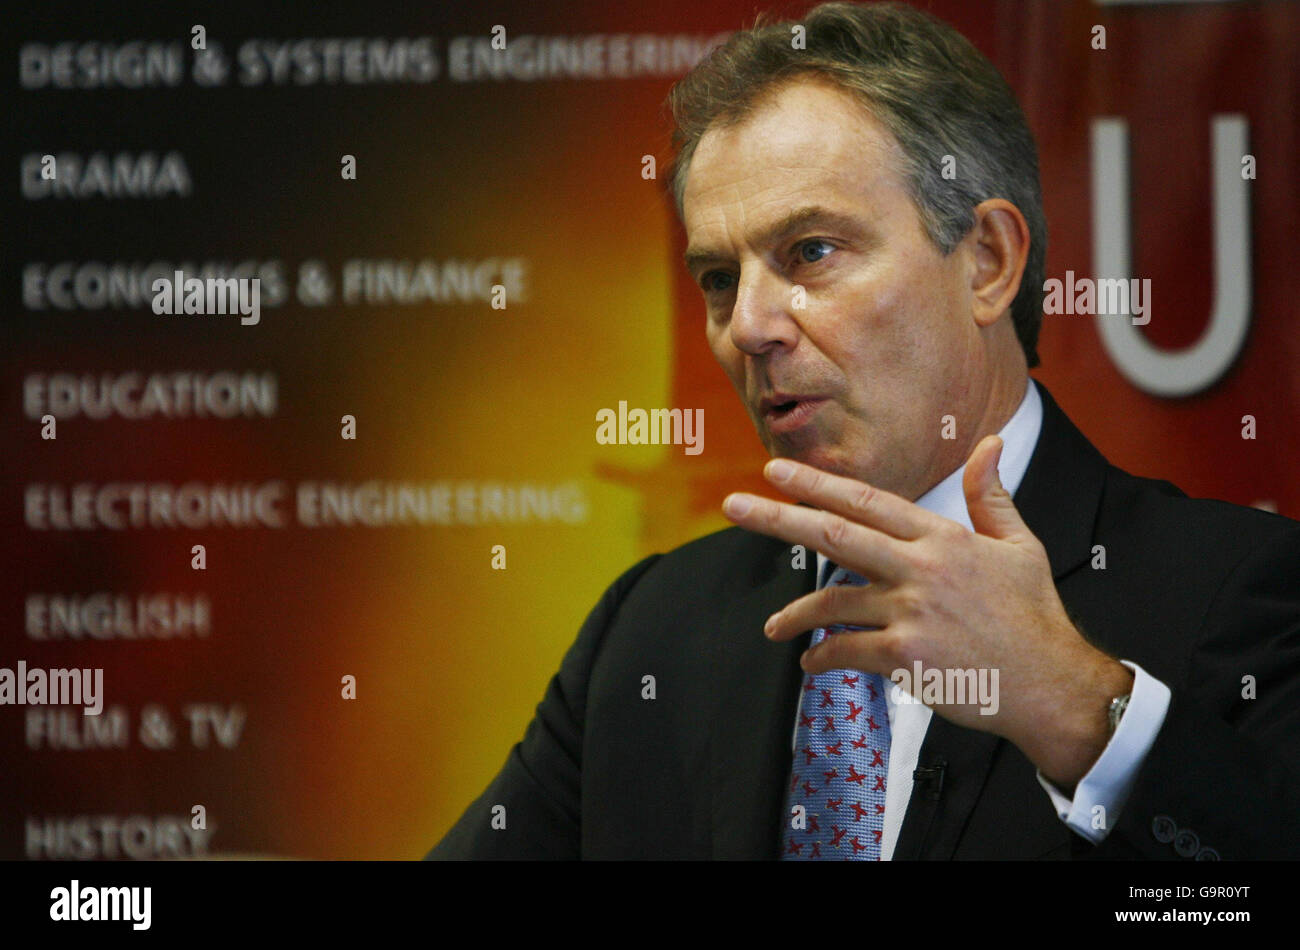 Prime Minister Tony Blair speaking during a visit to Brunel University in Uxbridge, Middlesex, where he said that universities must launch US-style fundraising campaigns targeting former students for cash donation. Stock Photo